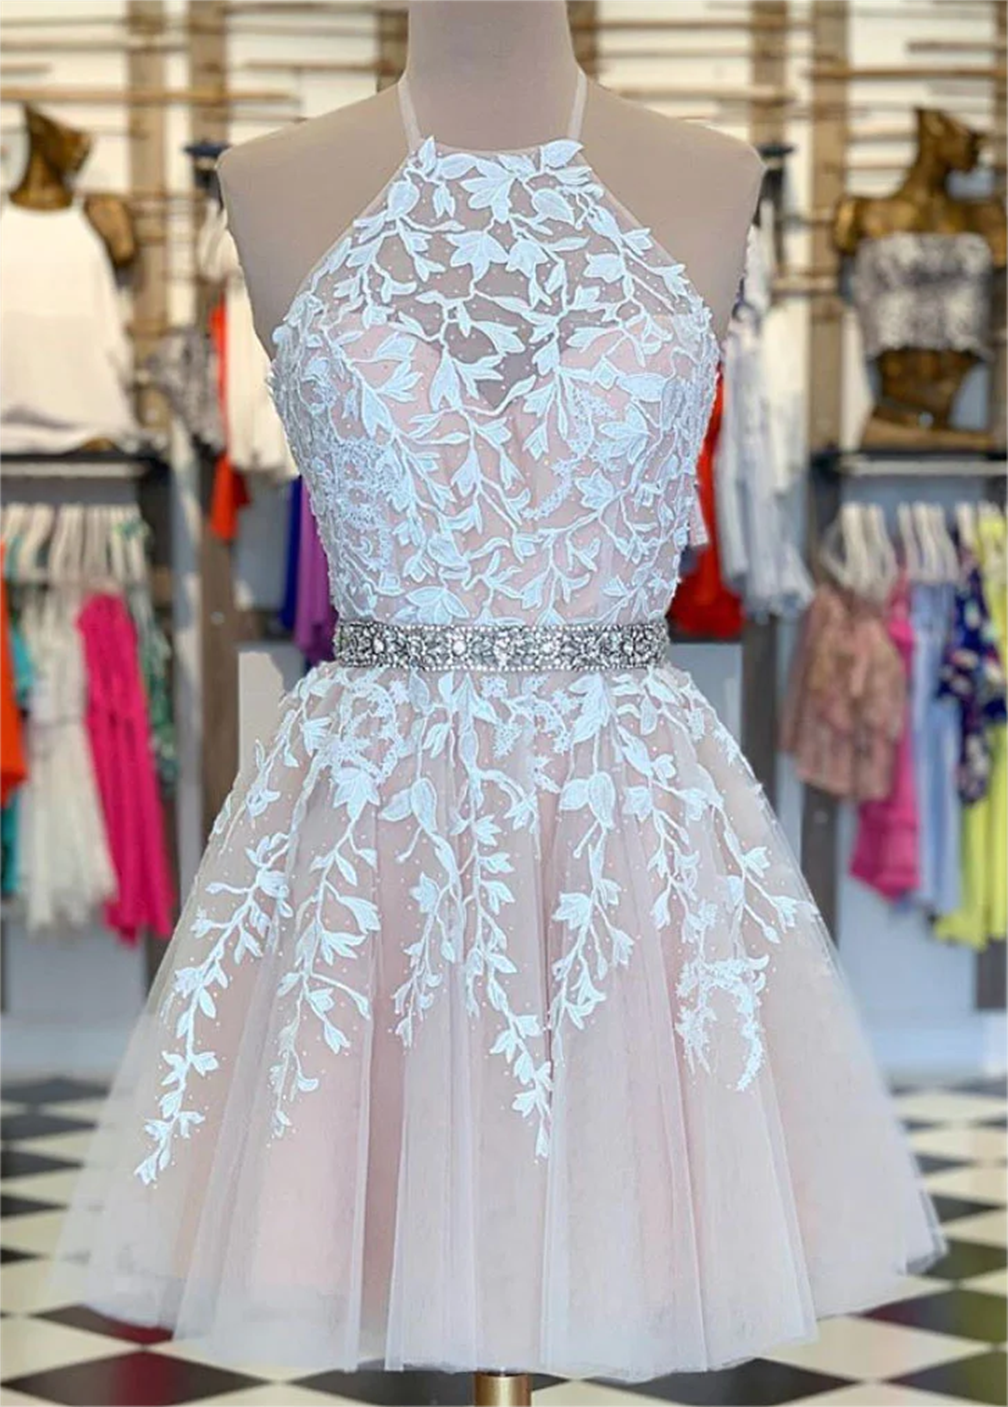 Women Cute Tulle Lace Prom Dress Short A-line Appliques Homecoming Dress Sleeveless Cocktail Party Gowns Yp106